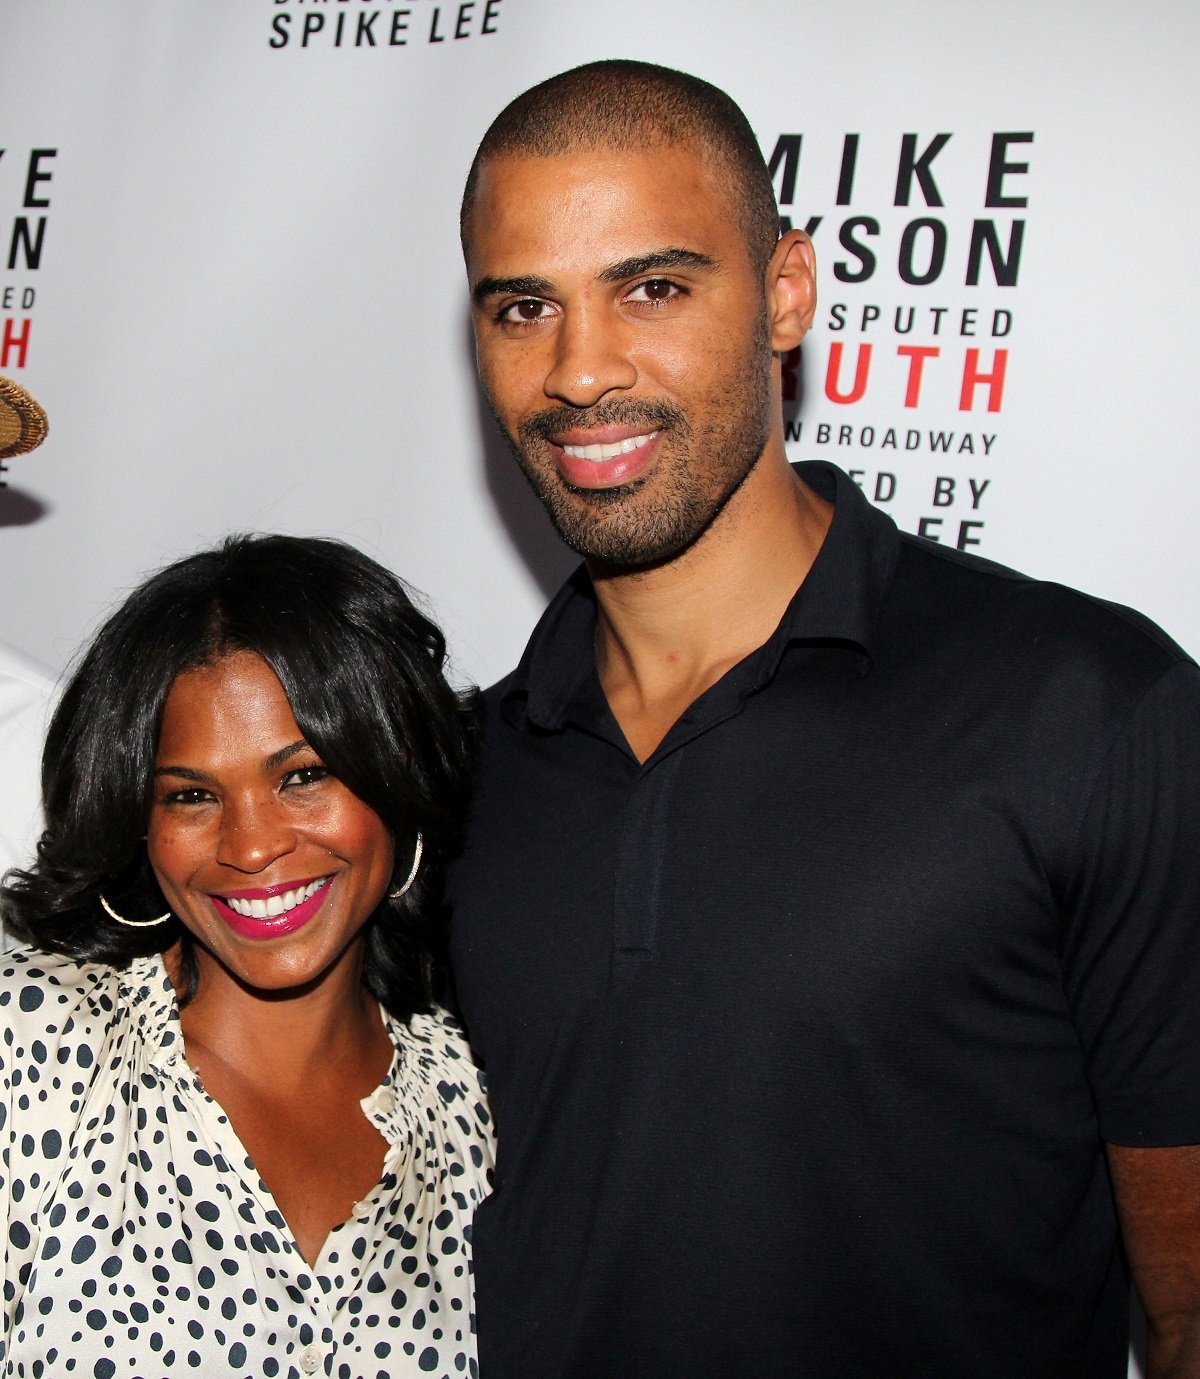 Nia Long and Ime Udoka pose for photo together at Broadway opening night for Mike Tyson Undisputed Truth